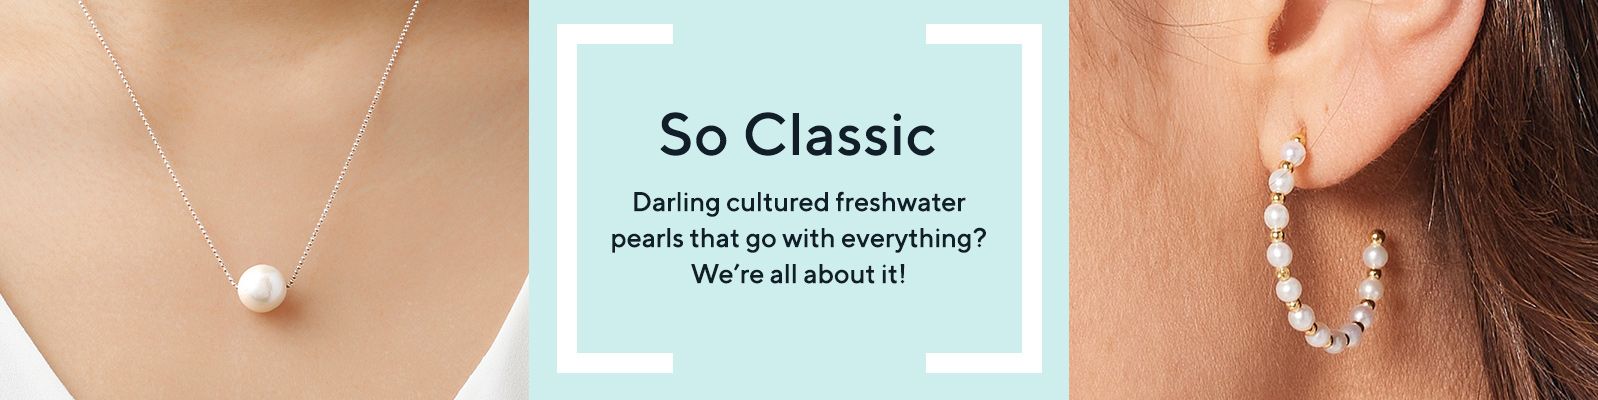 So Classic - Darling cultured freshwater pearls that go with everything? We're all about it!